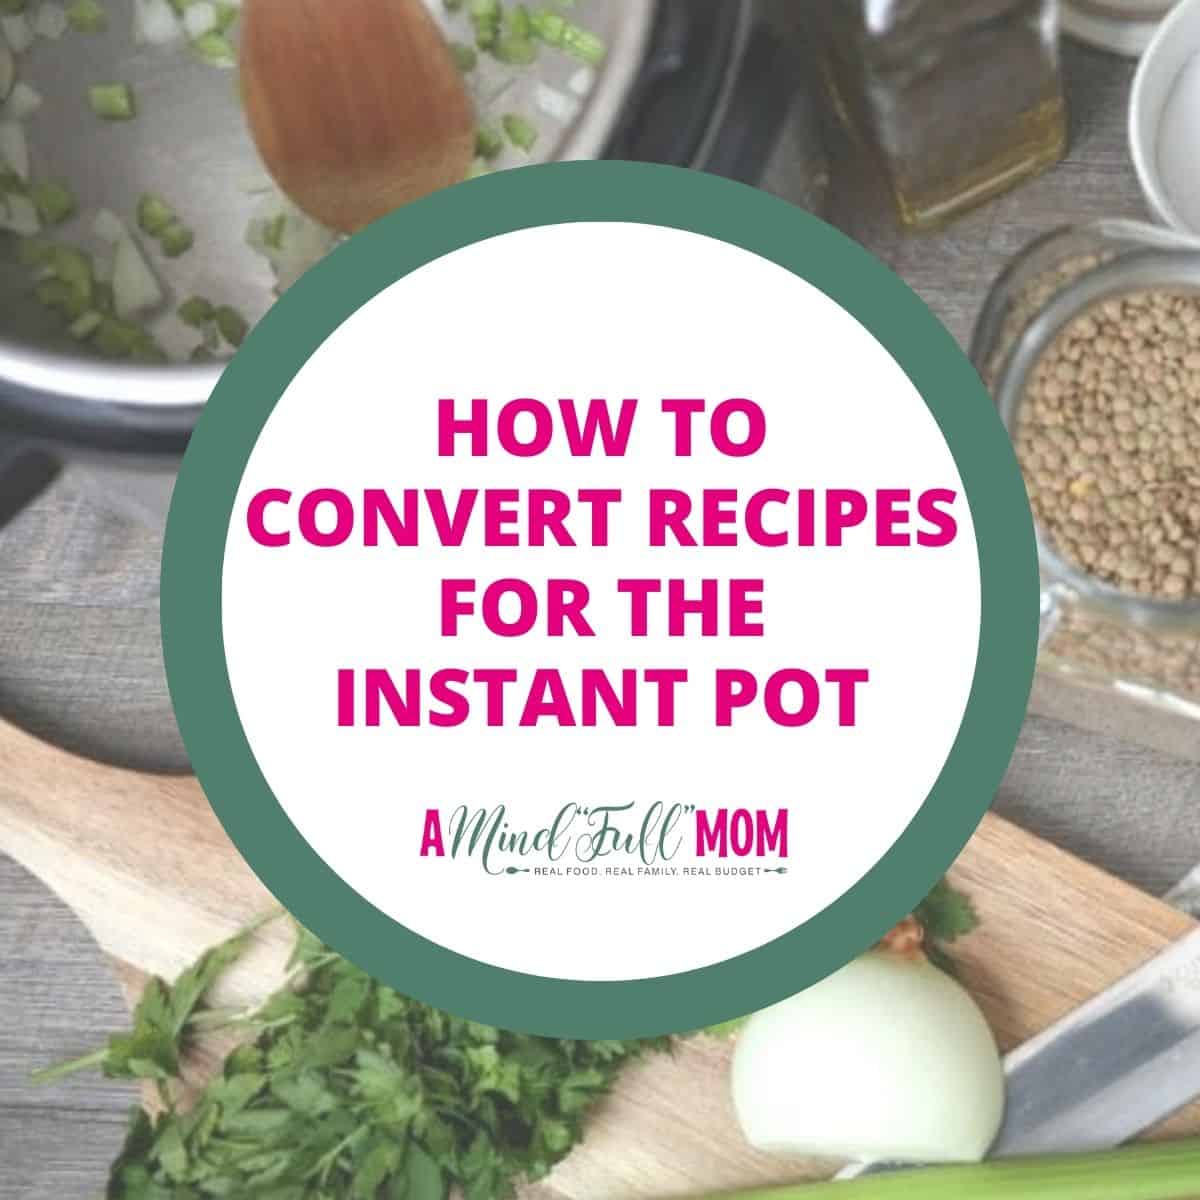 Instant Pot Recipes: More than 90 Recipes - Cooking with Curls